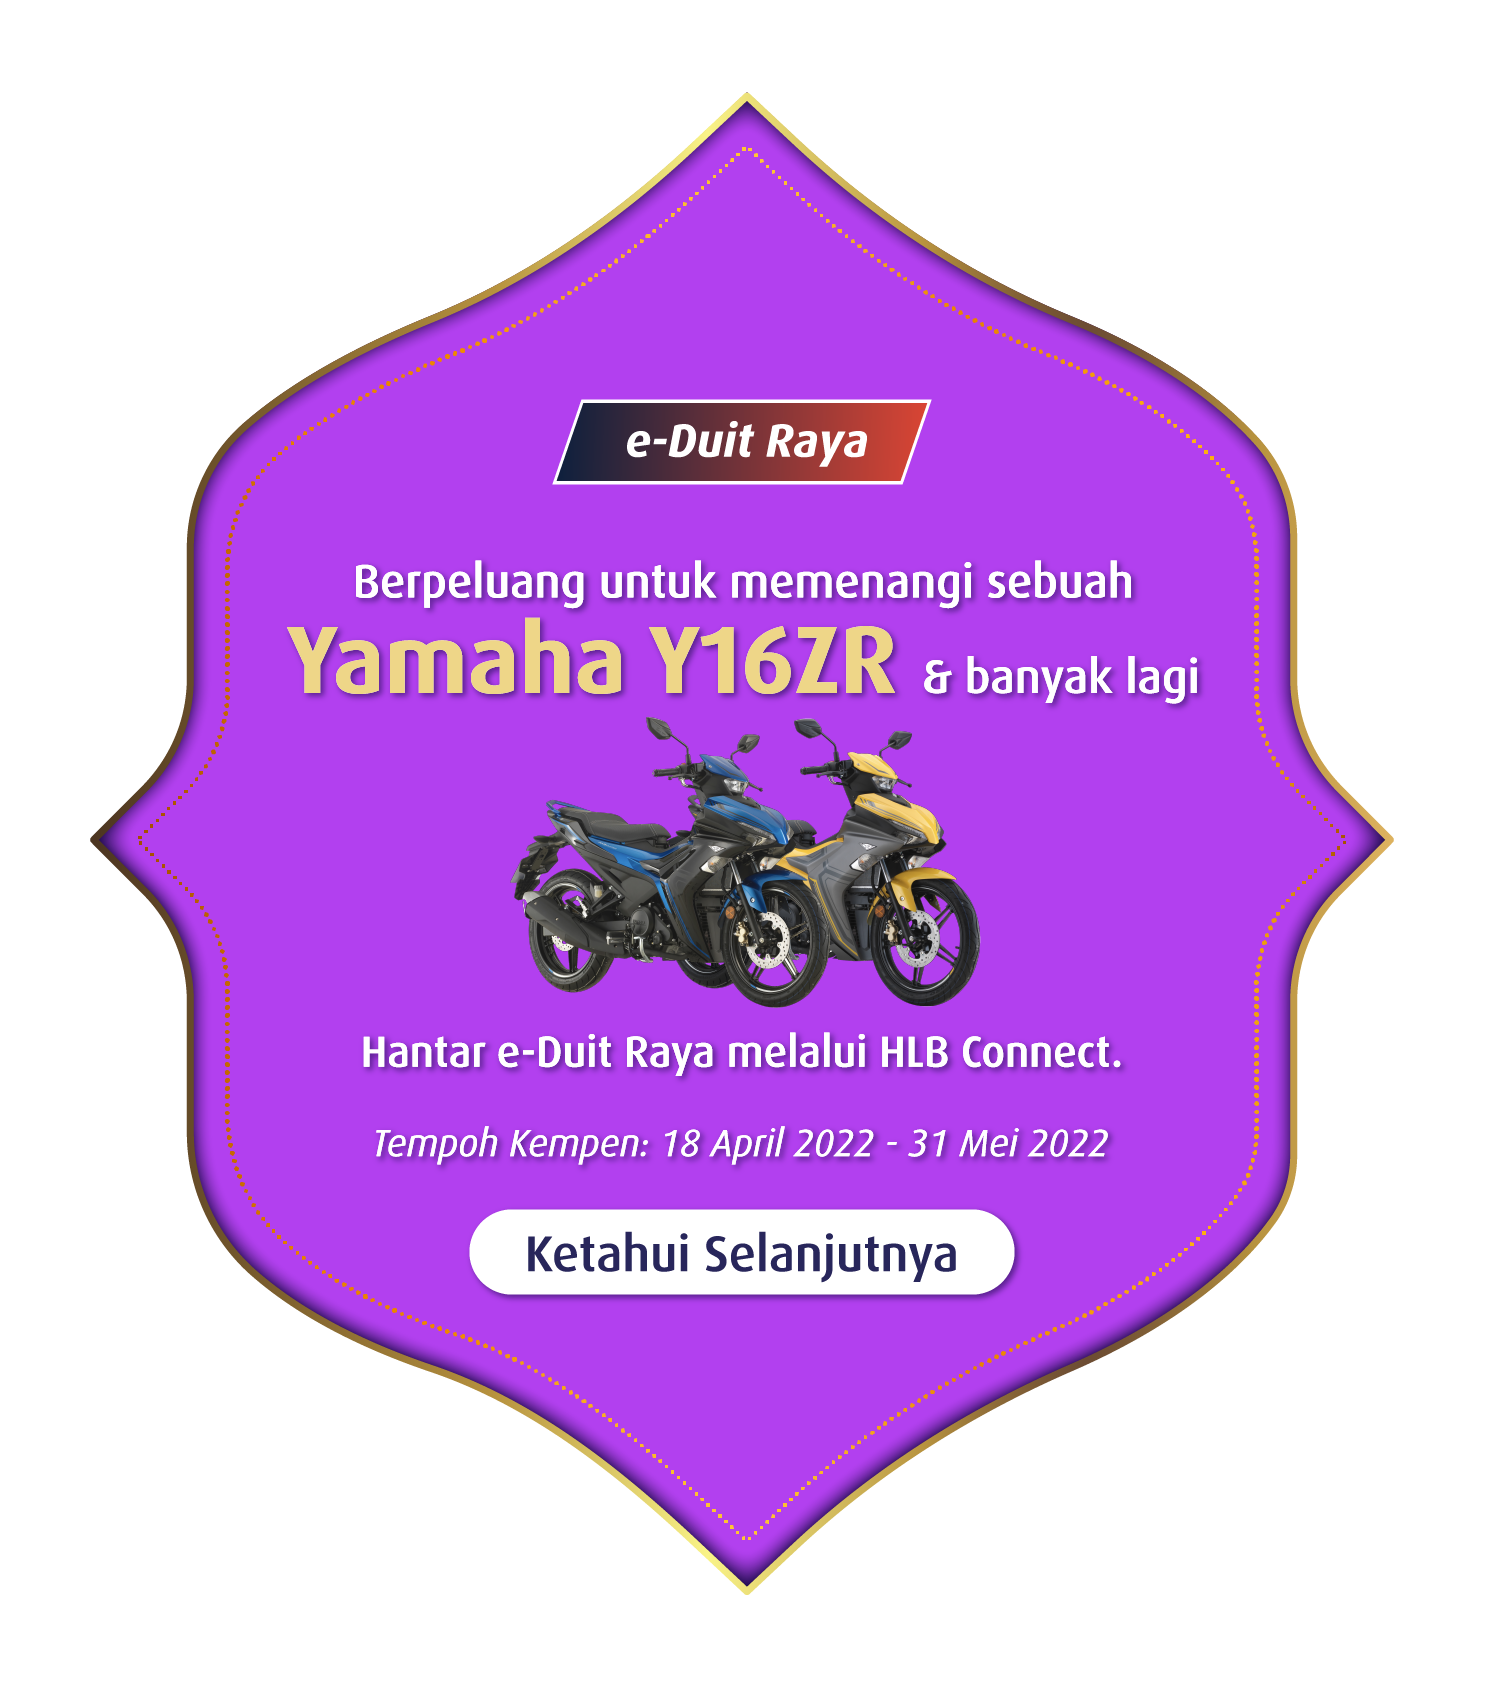 Stand a chance to win a Yamaha Y16ZR & more Send e-Duit Raya via HLB Connect App